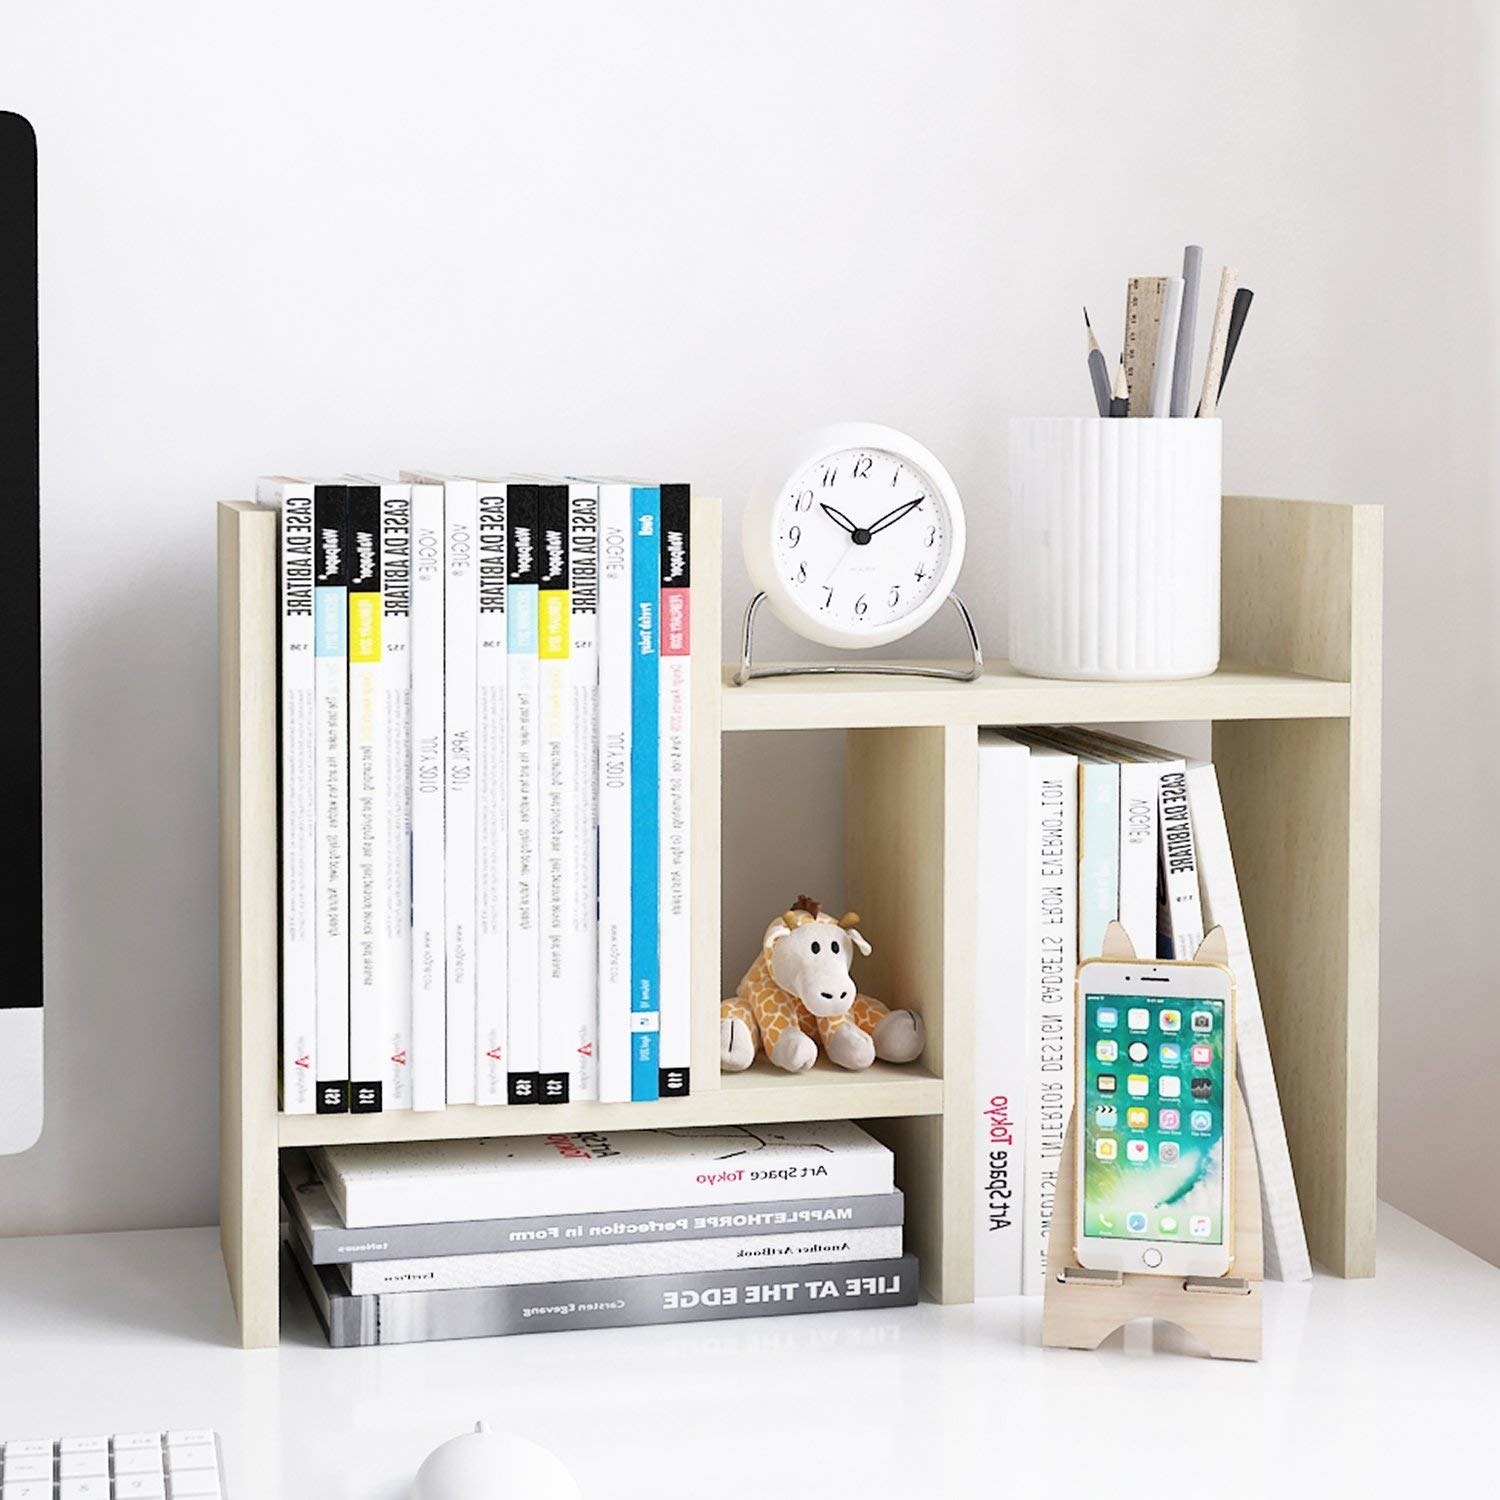 26 Things To Put On Your Desk That'll Have Your Coworkers Saying